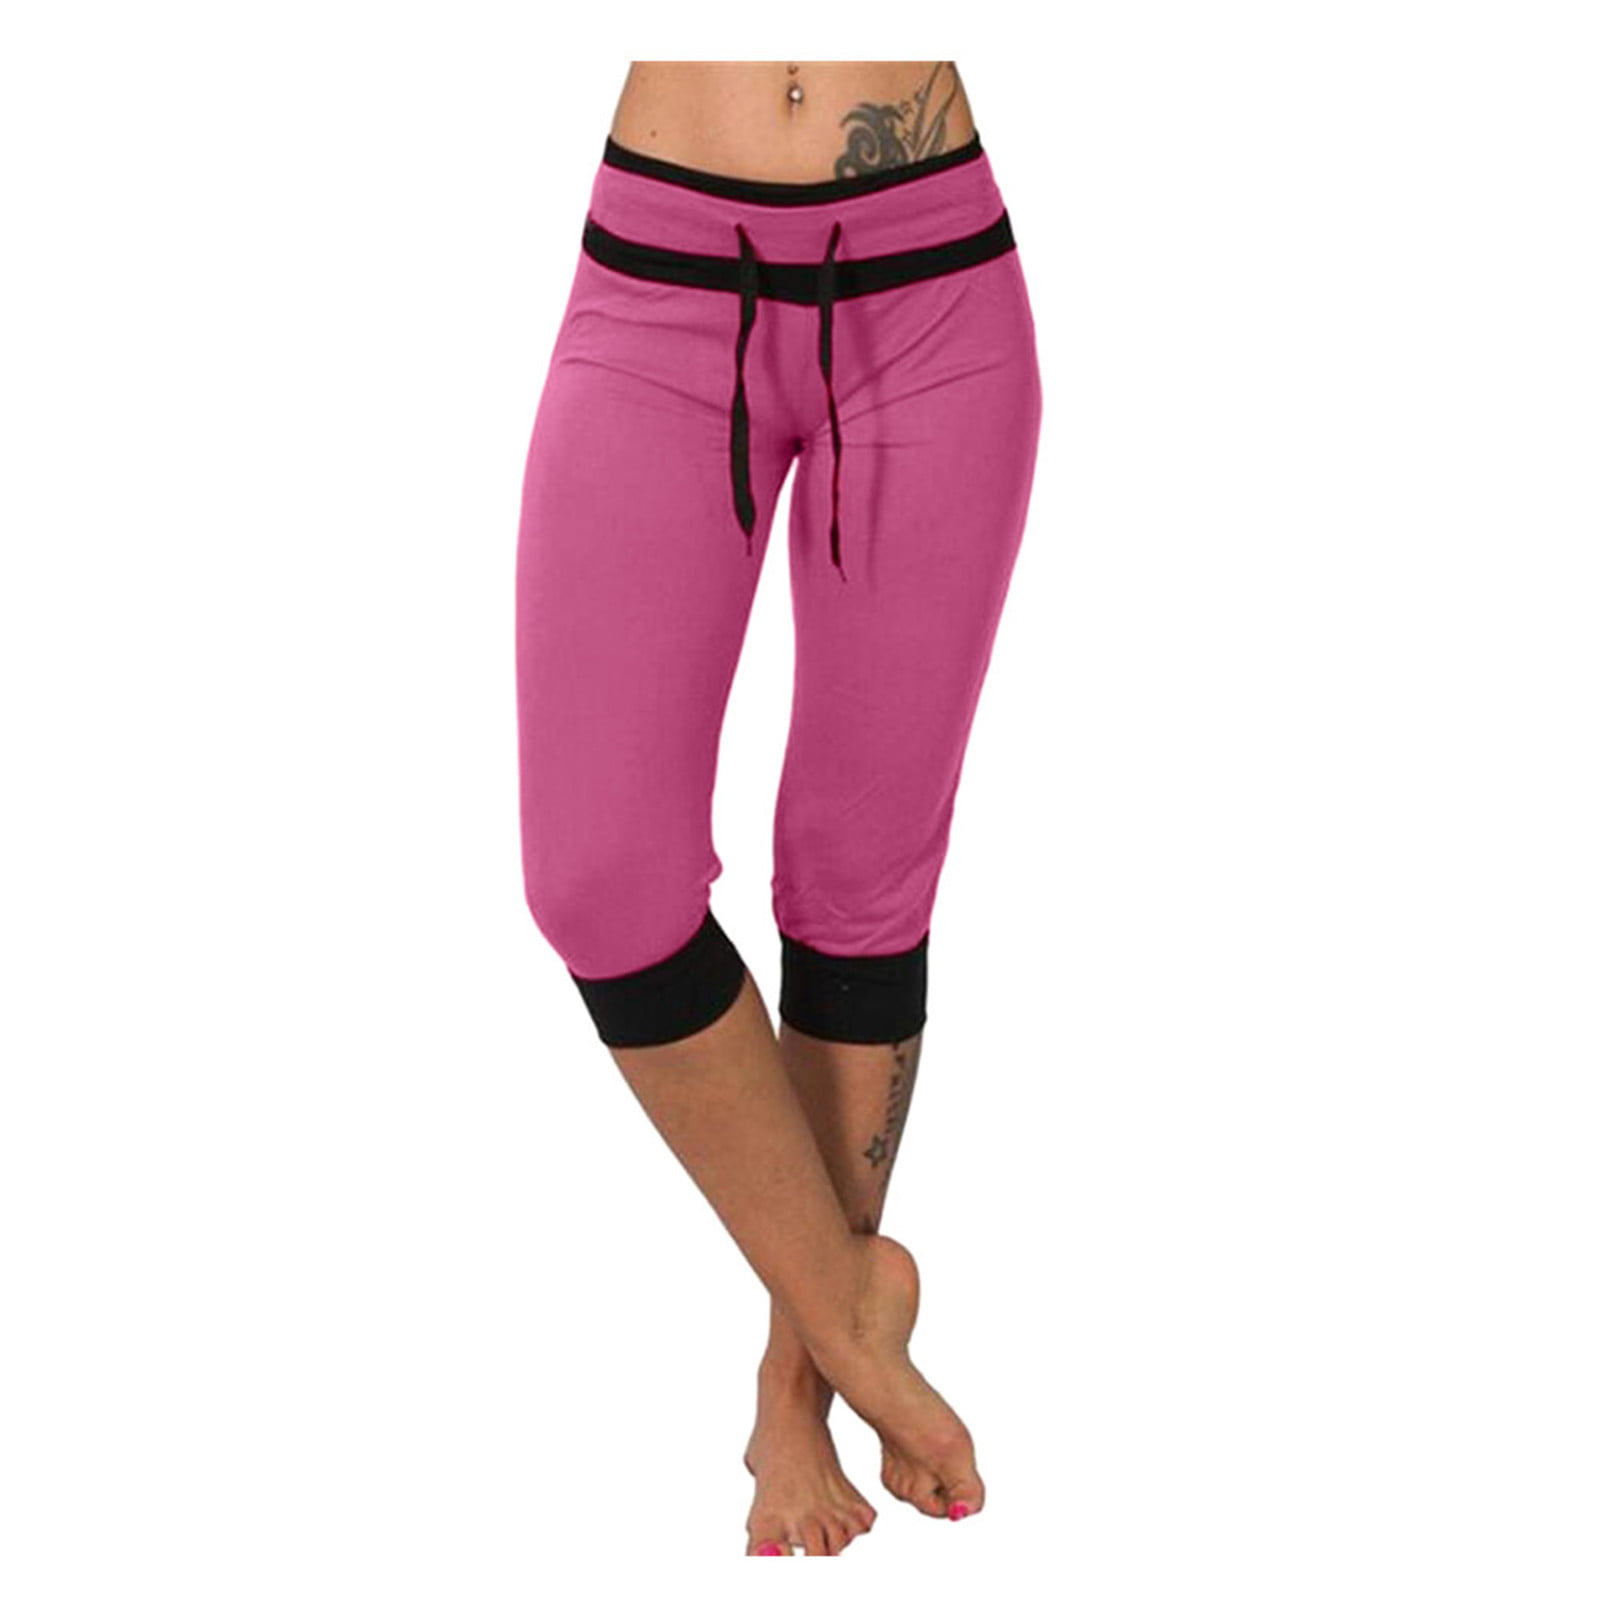 Outfmvch Yoga Pants Women Flare Leggings Polyester,Spandex Relaxed